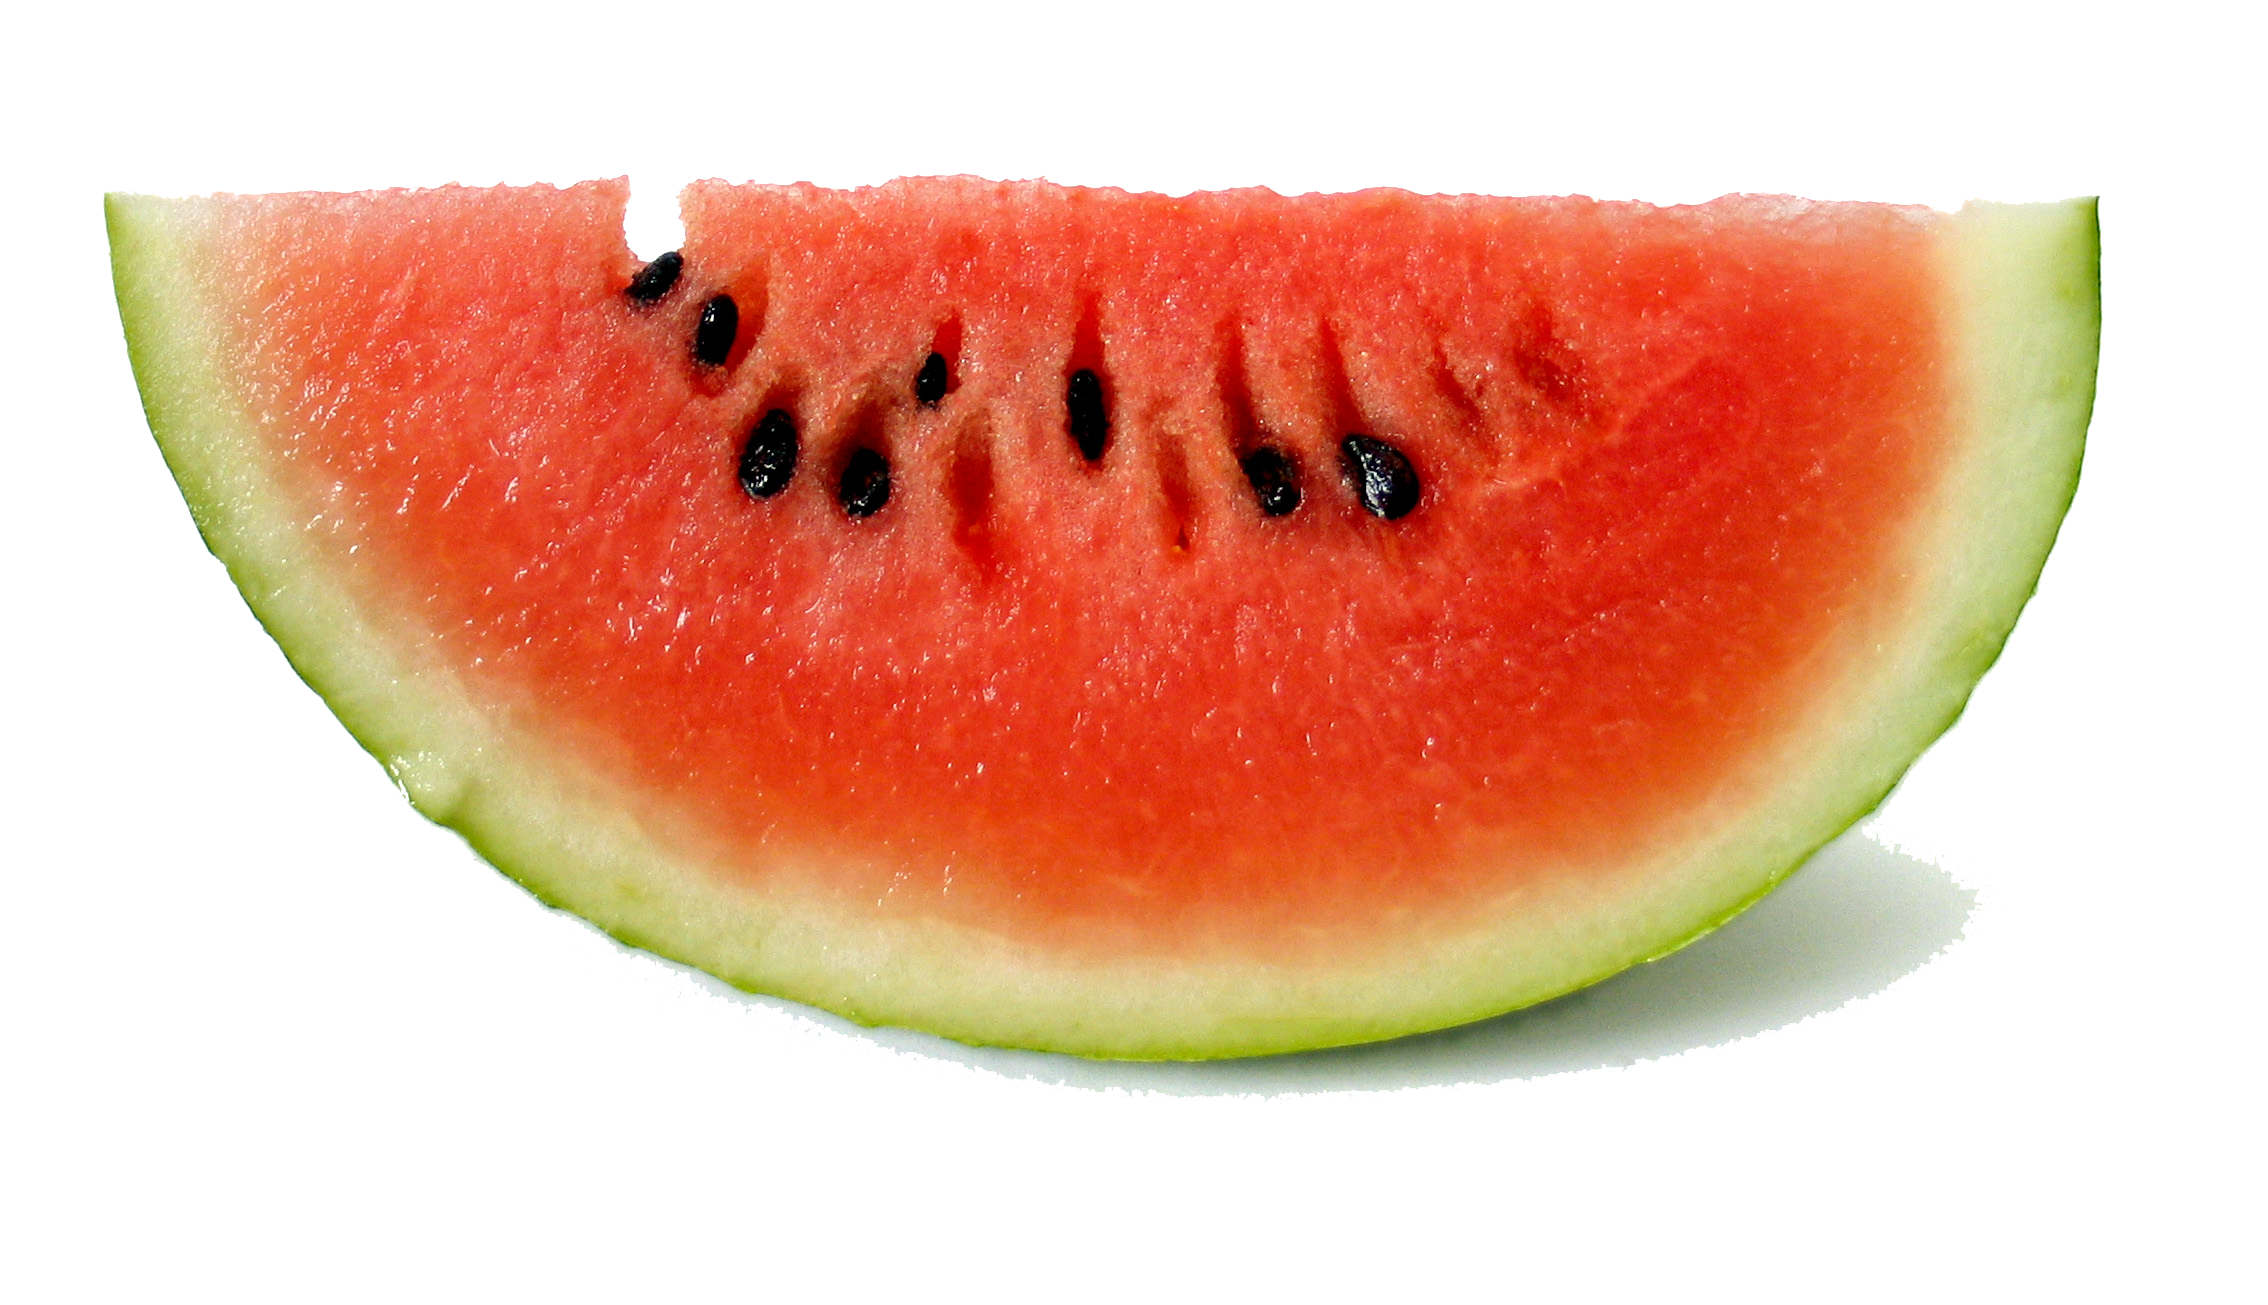 Png transparent images all. Watermelon clipart watermelon rind